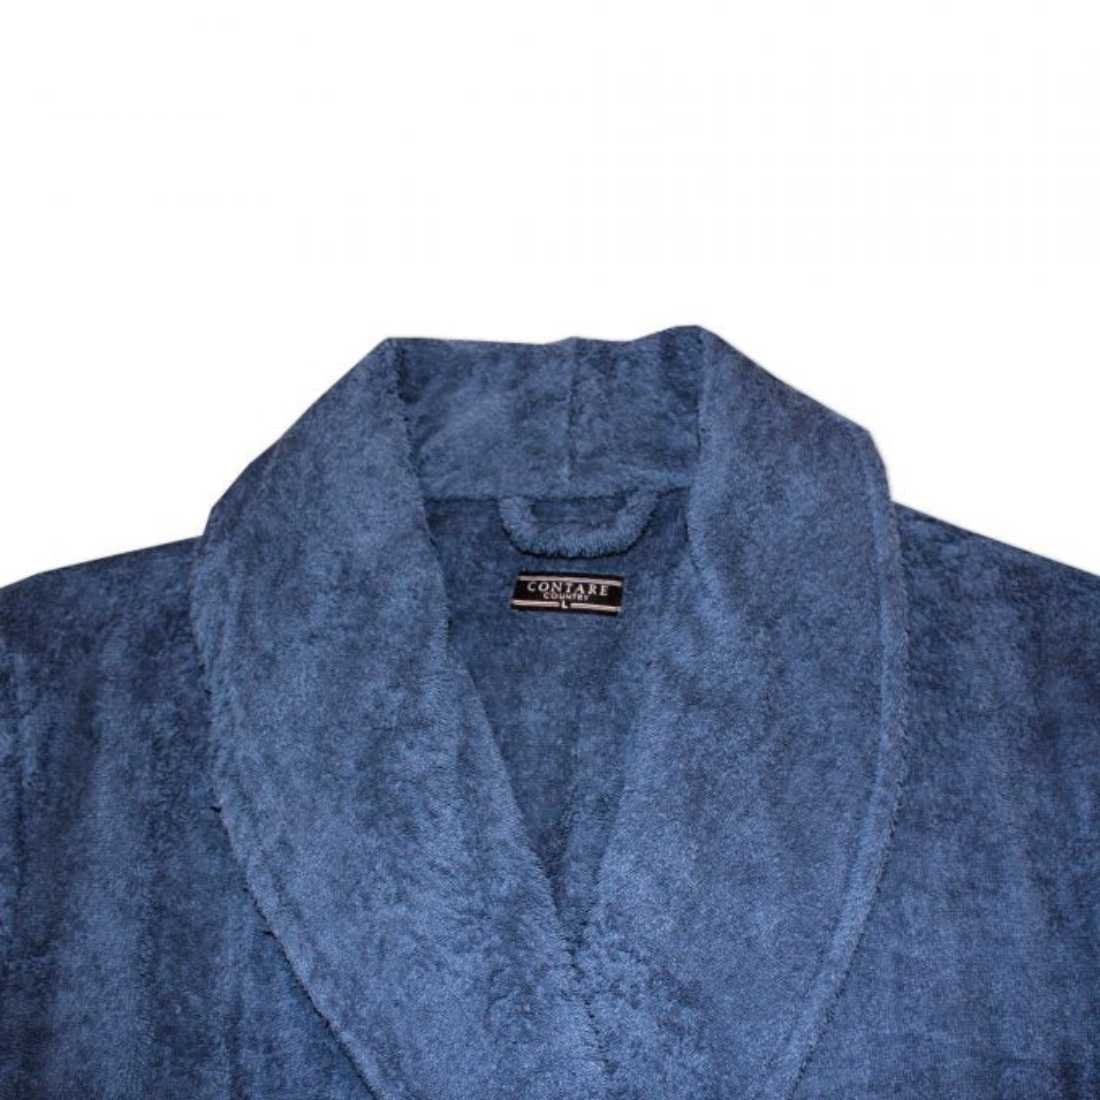 Contare Country Terry Dressing Gown Blue Mens Sleepwear by Contare | The Bloke Shop